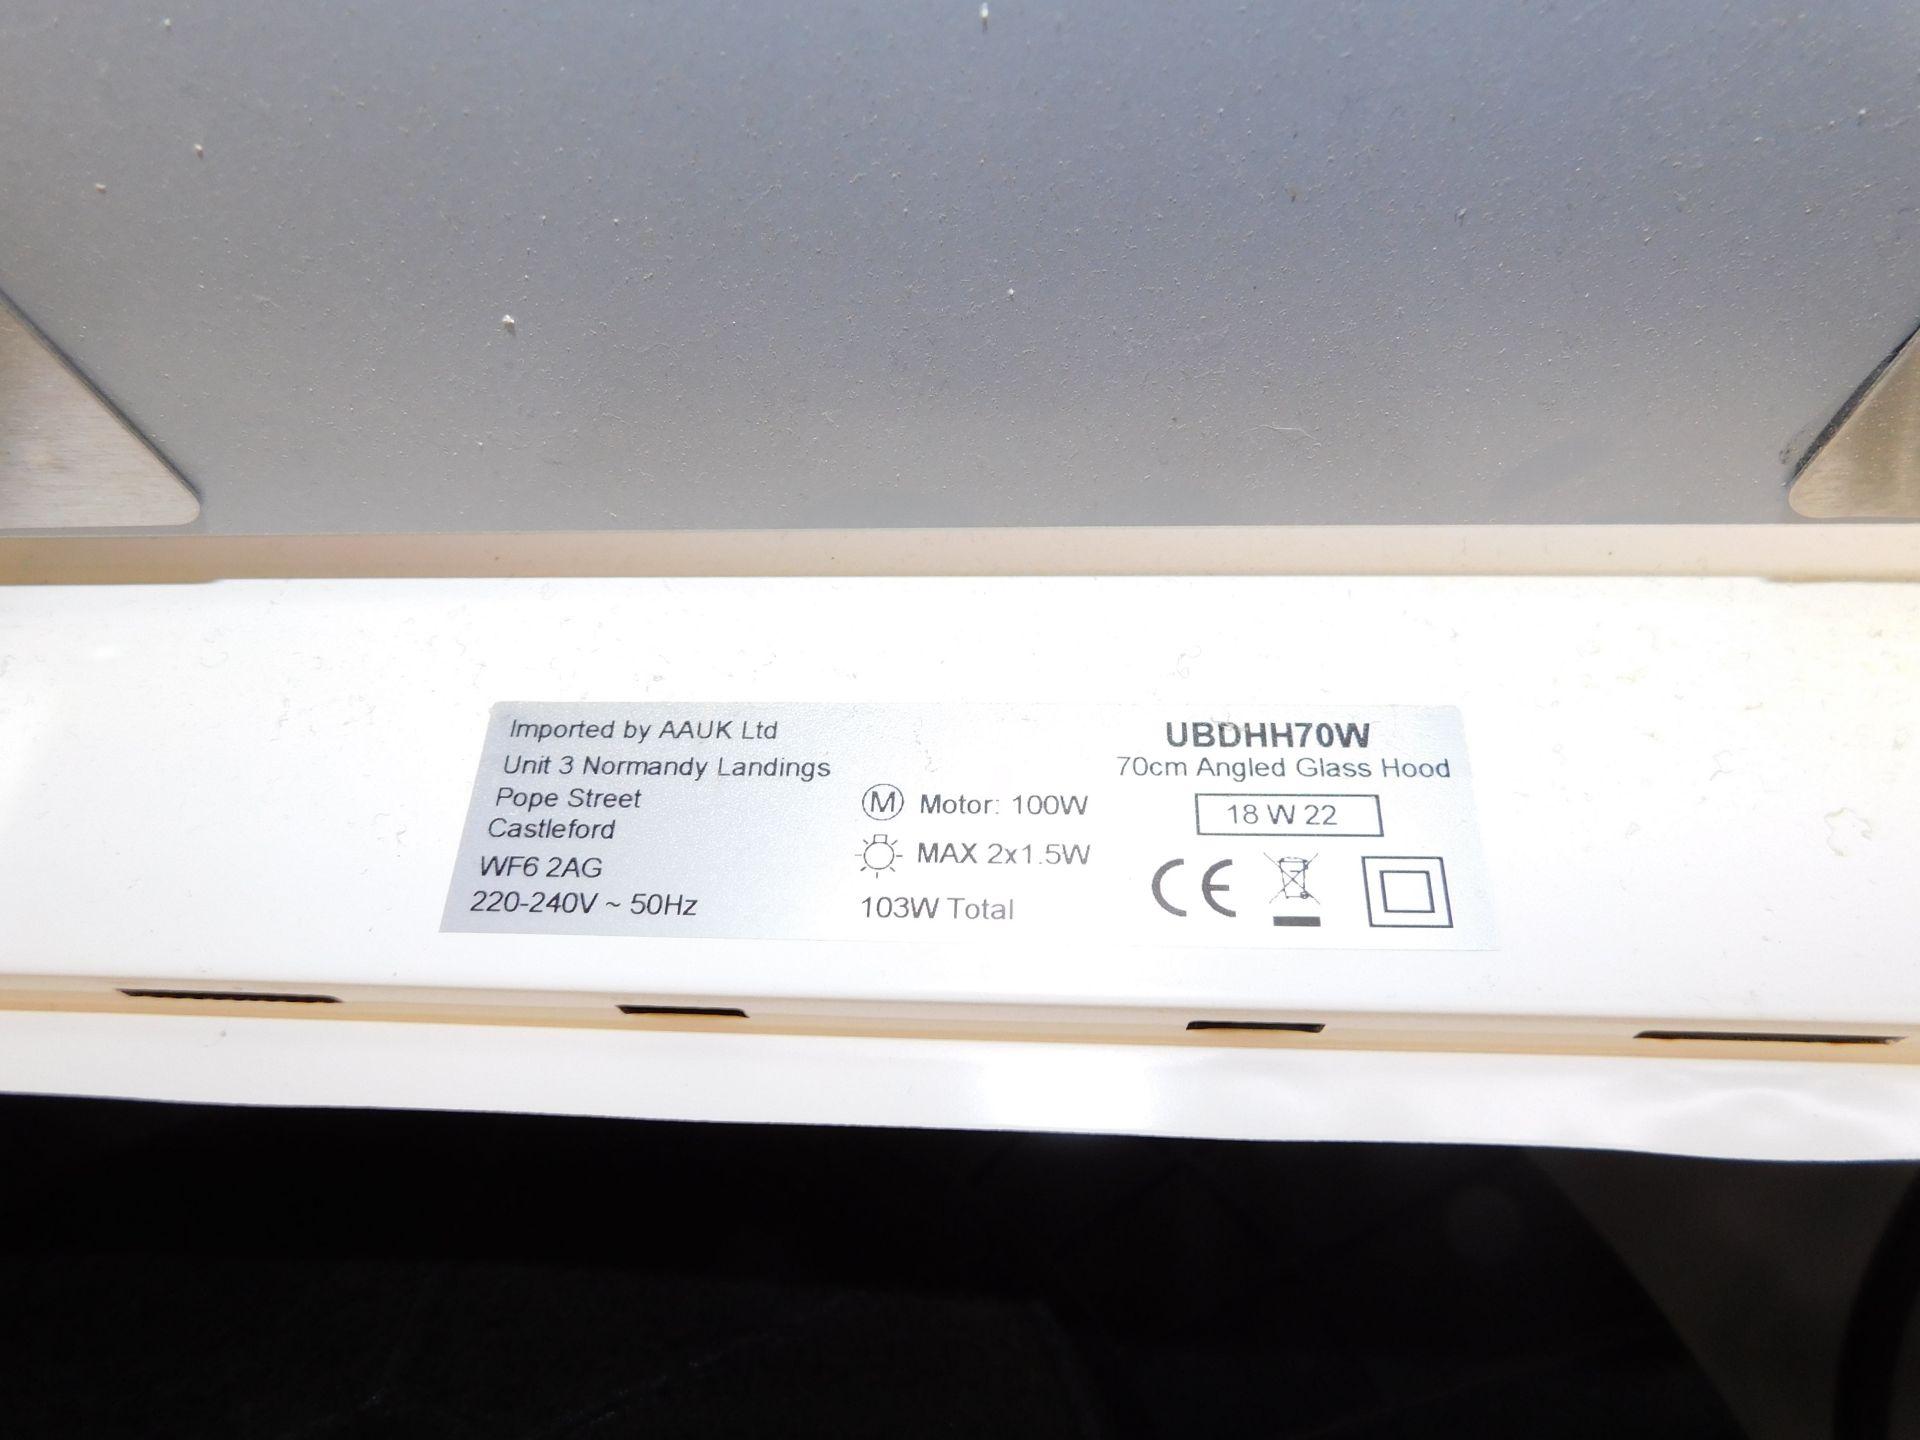 UBDHH70W Filter Hood (Ex-Display)  (Location Stockport. Please Refer to General Notes) - Image 2 of 2